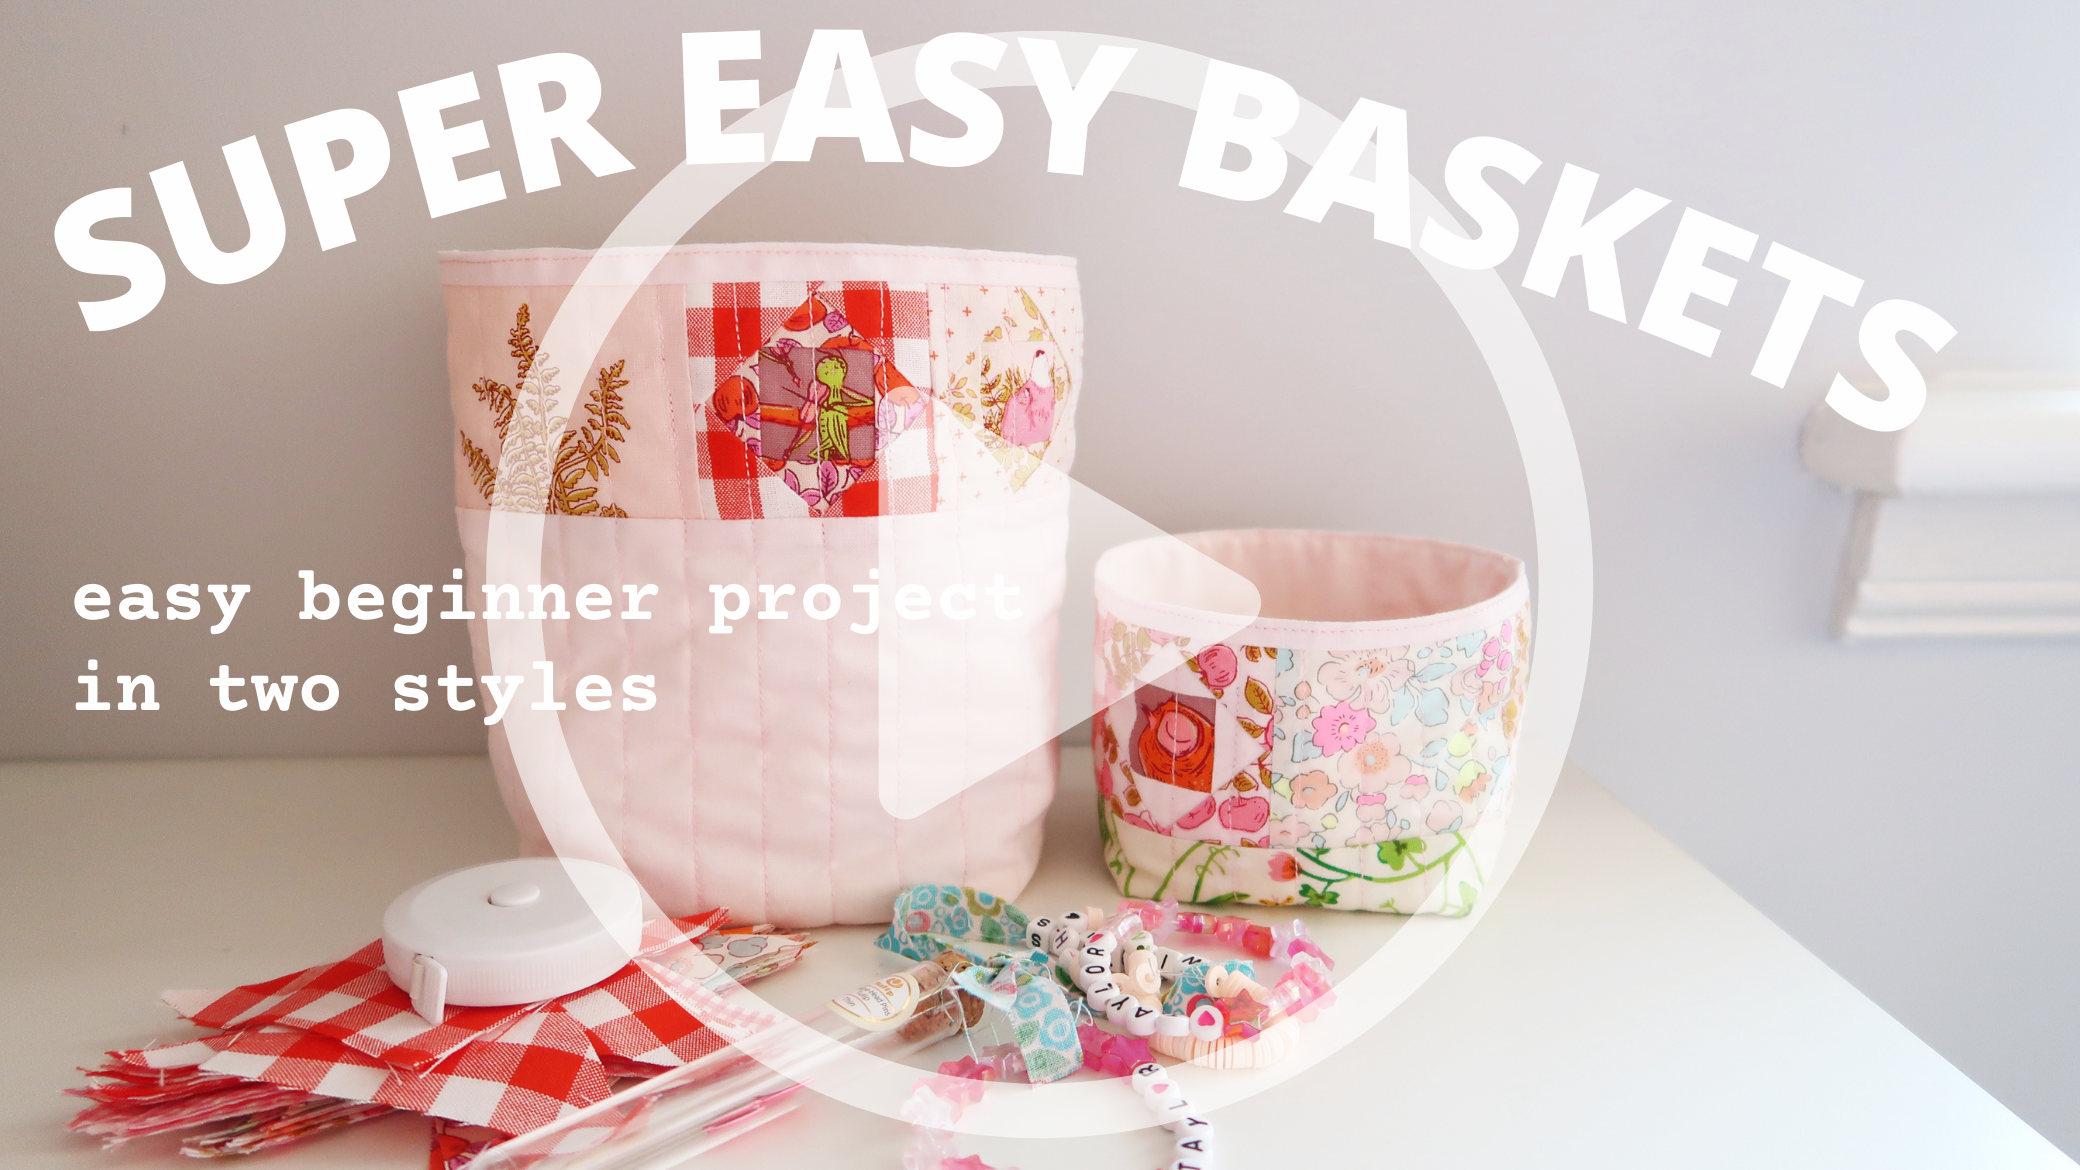 Super Easy Basket Sewing Pattern and Video Tutorial for Beginners